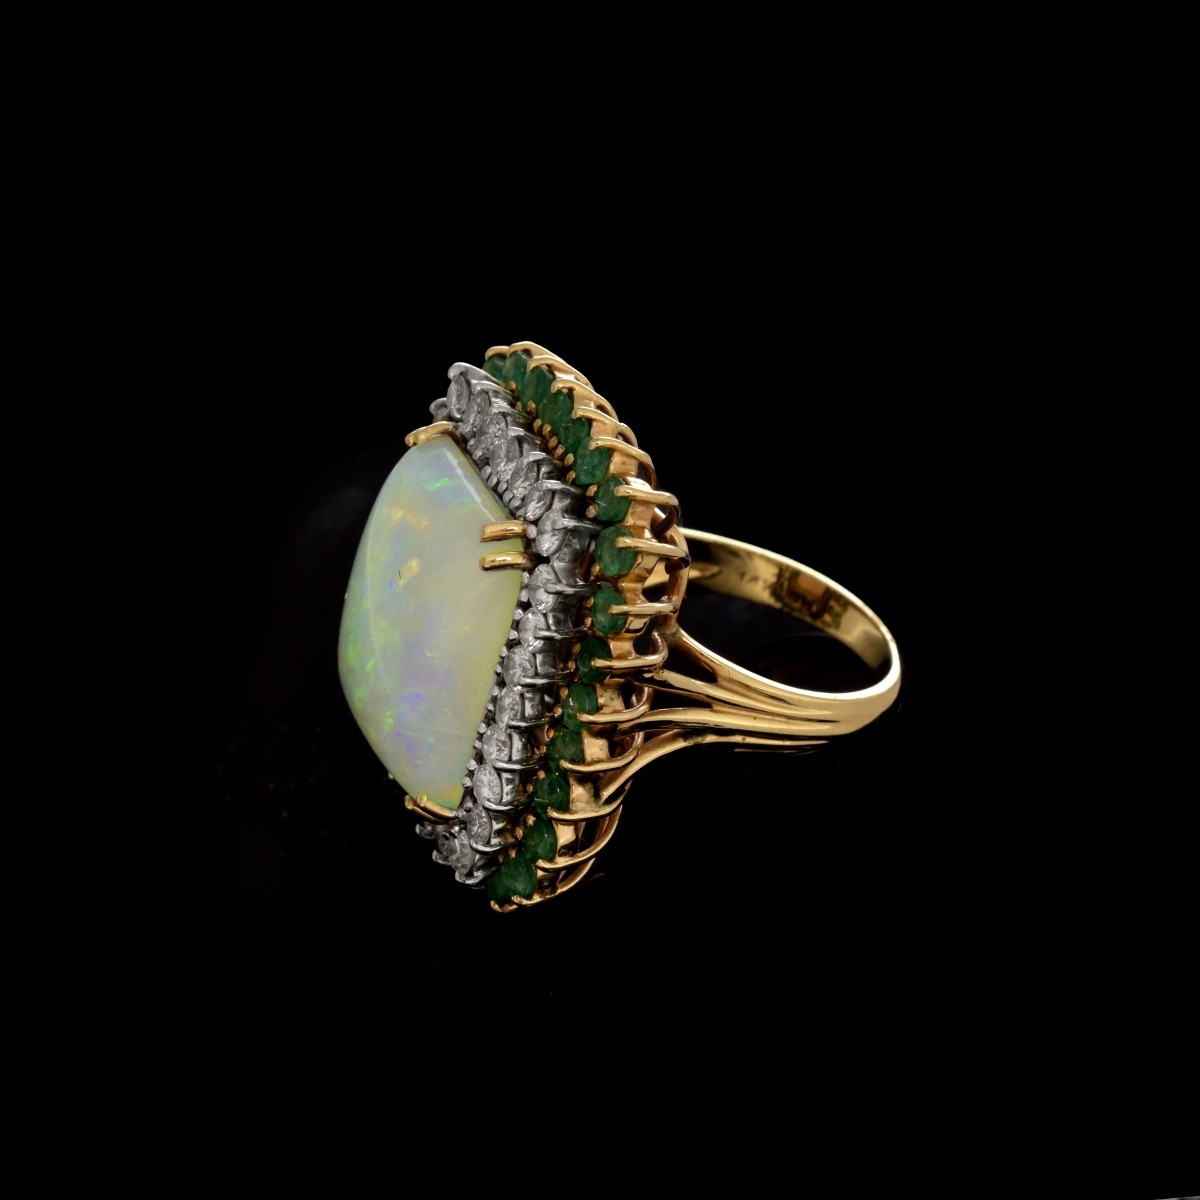 Opal, Diamond, Emerald and 14K Ring | Kodner Auctions